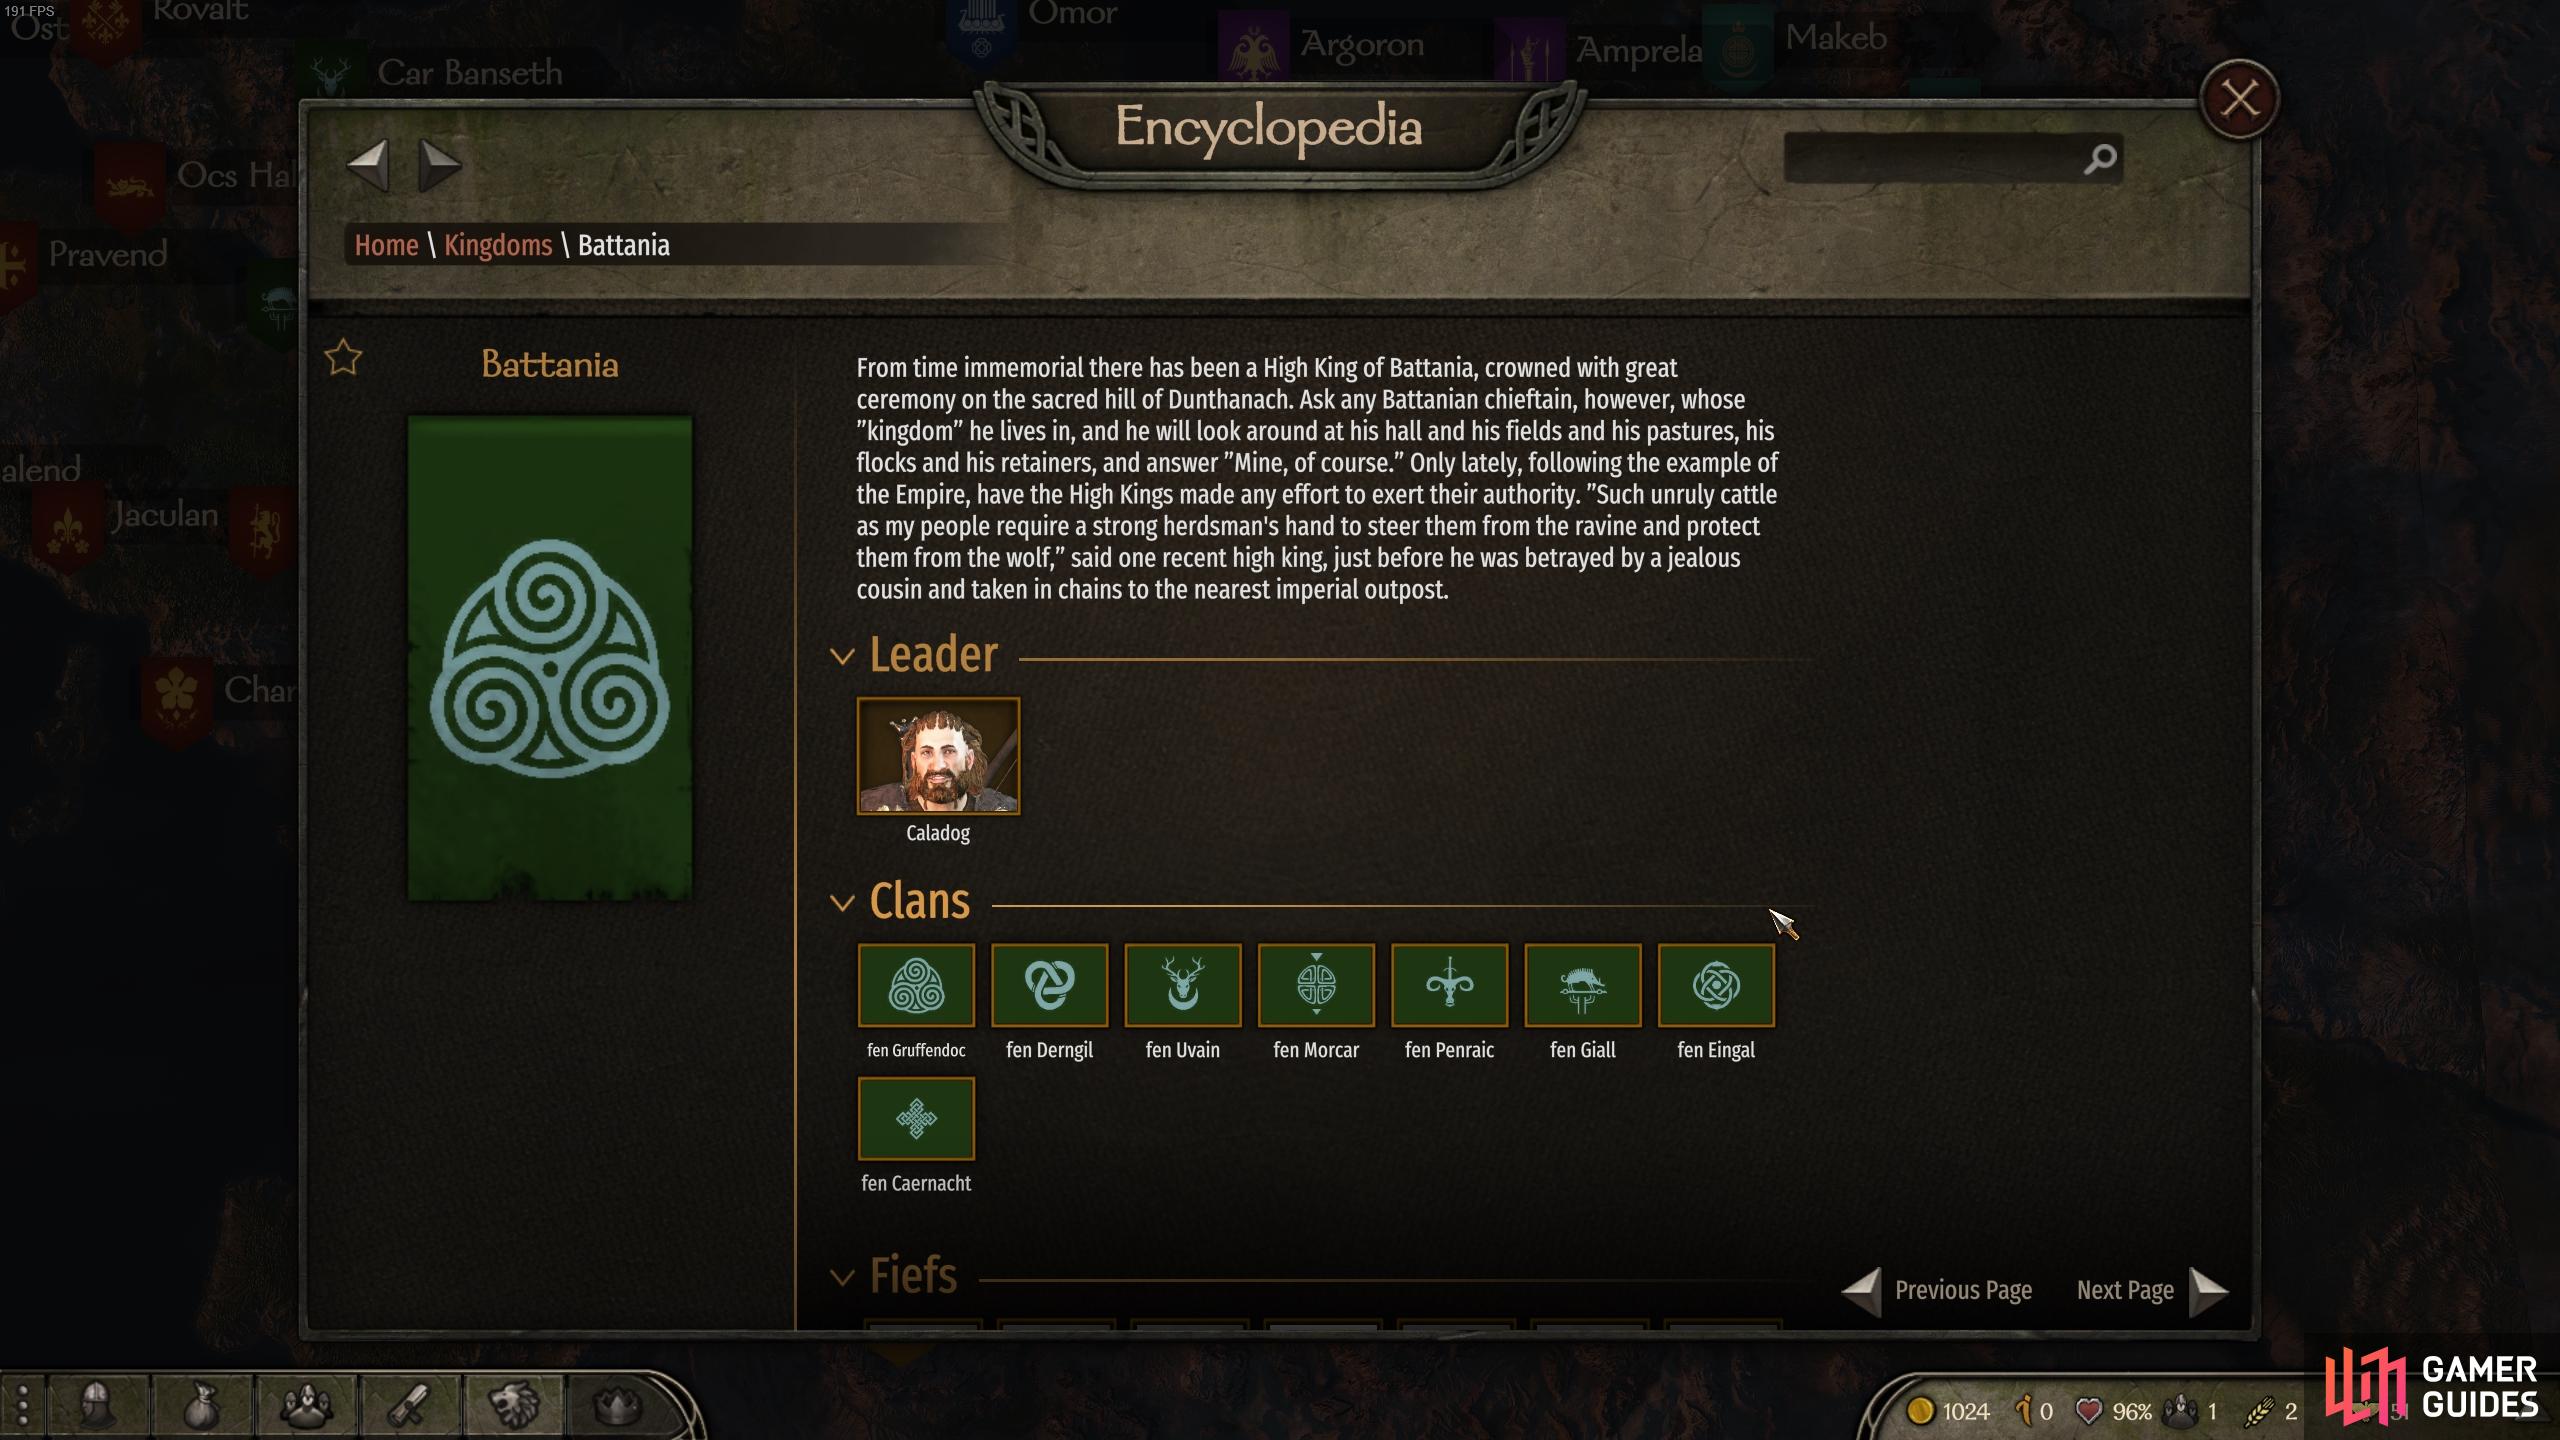 You can check each Kingdom tab to see its associated clans.